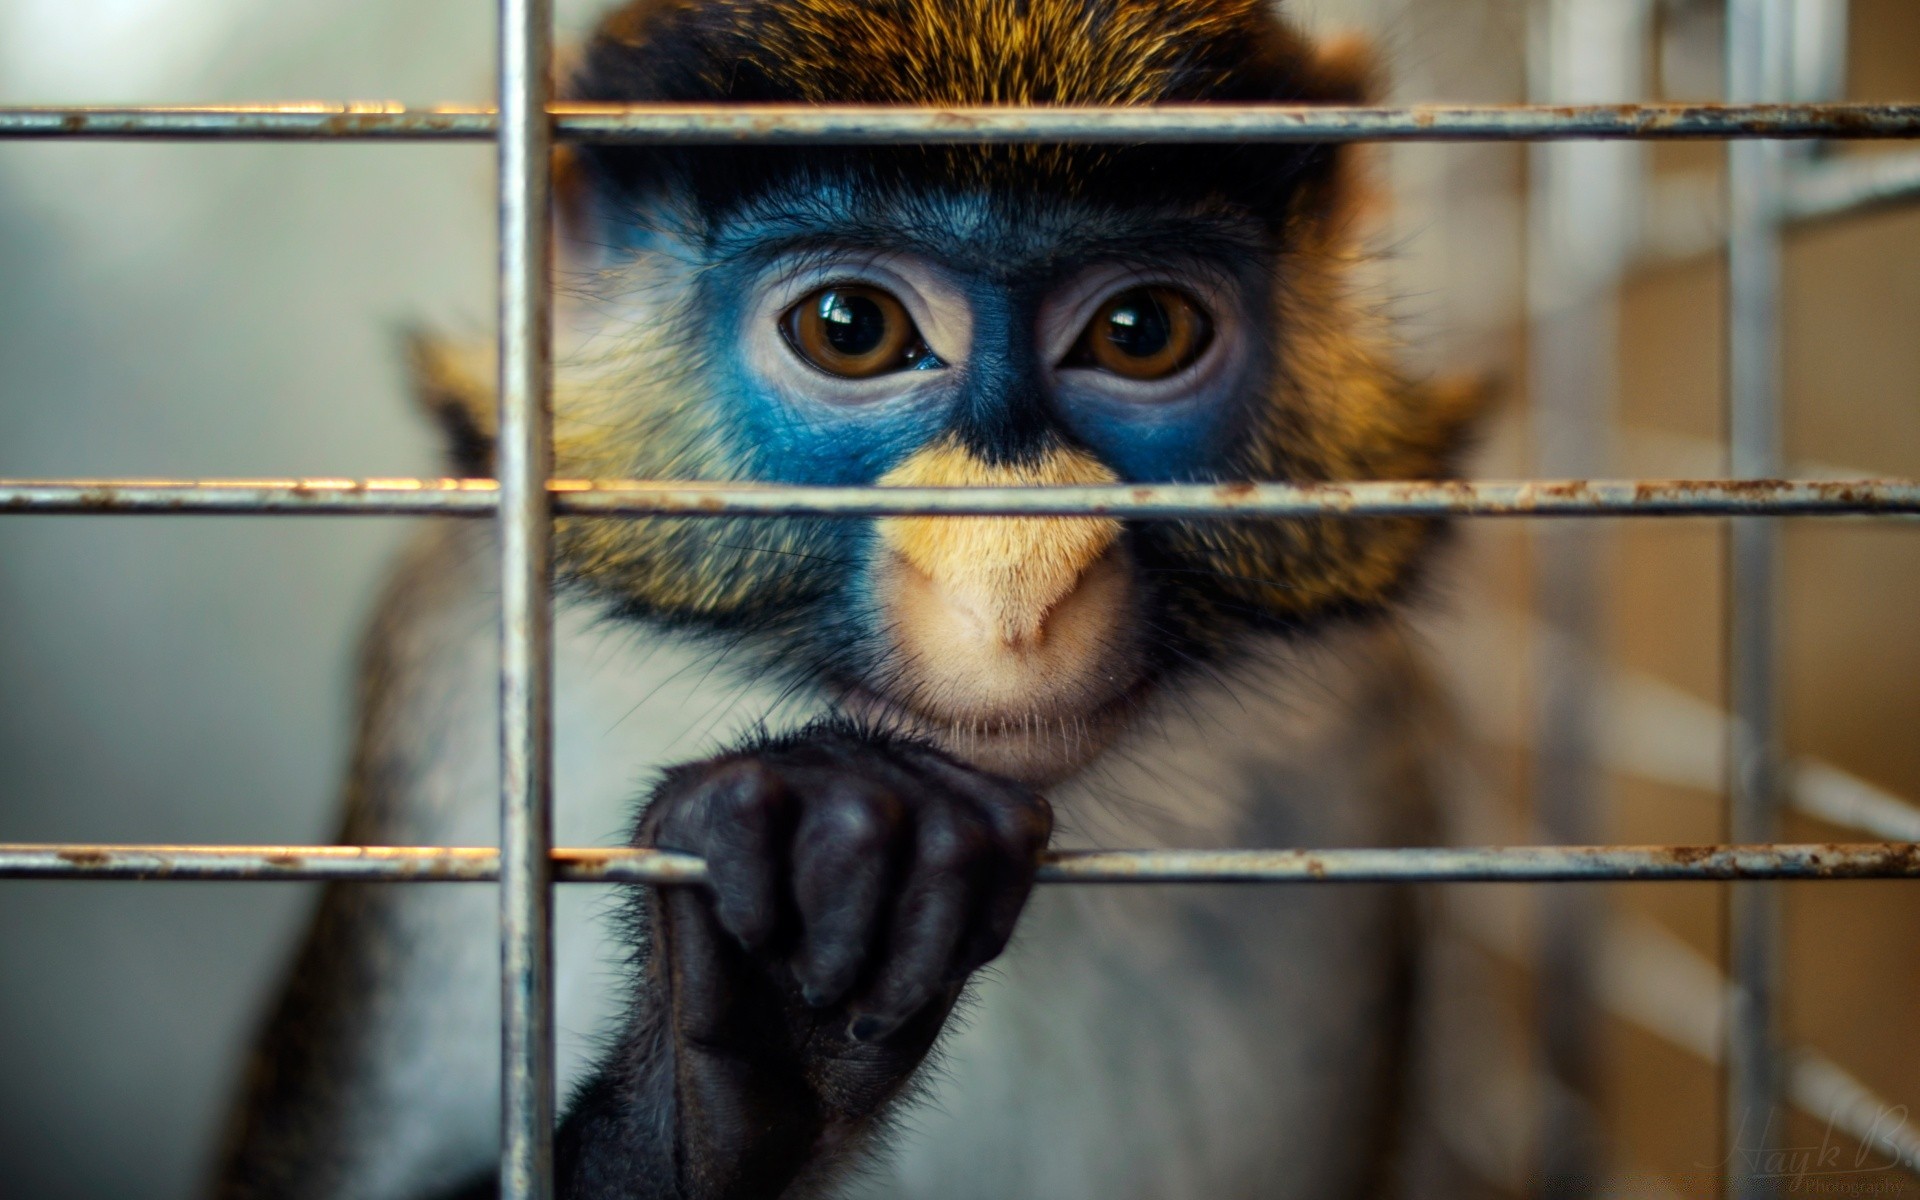 animals mammal monkey wildlife portrait animal primate cage cute nature zoo funny wild eye looking face one